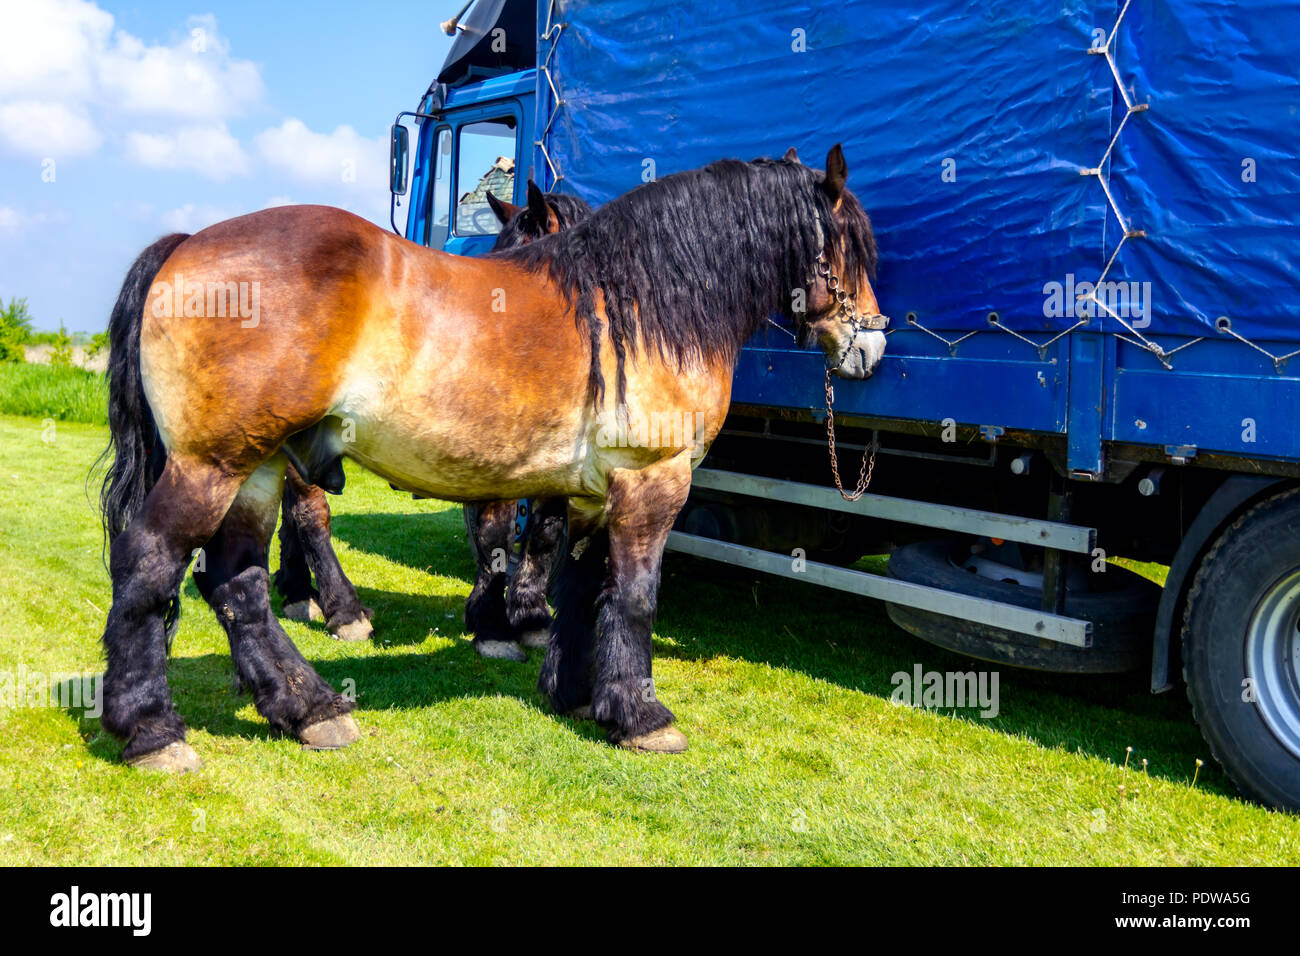 Colorful thoroughbred horse is tied to the truck with his reins, harness. Stock Photo